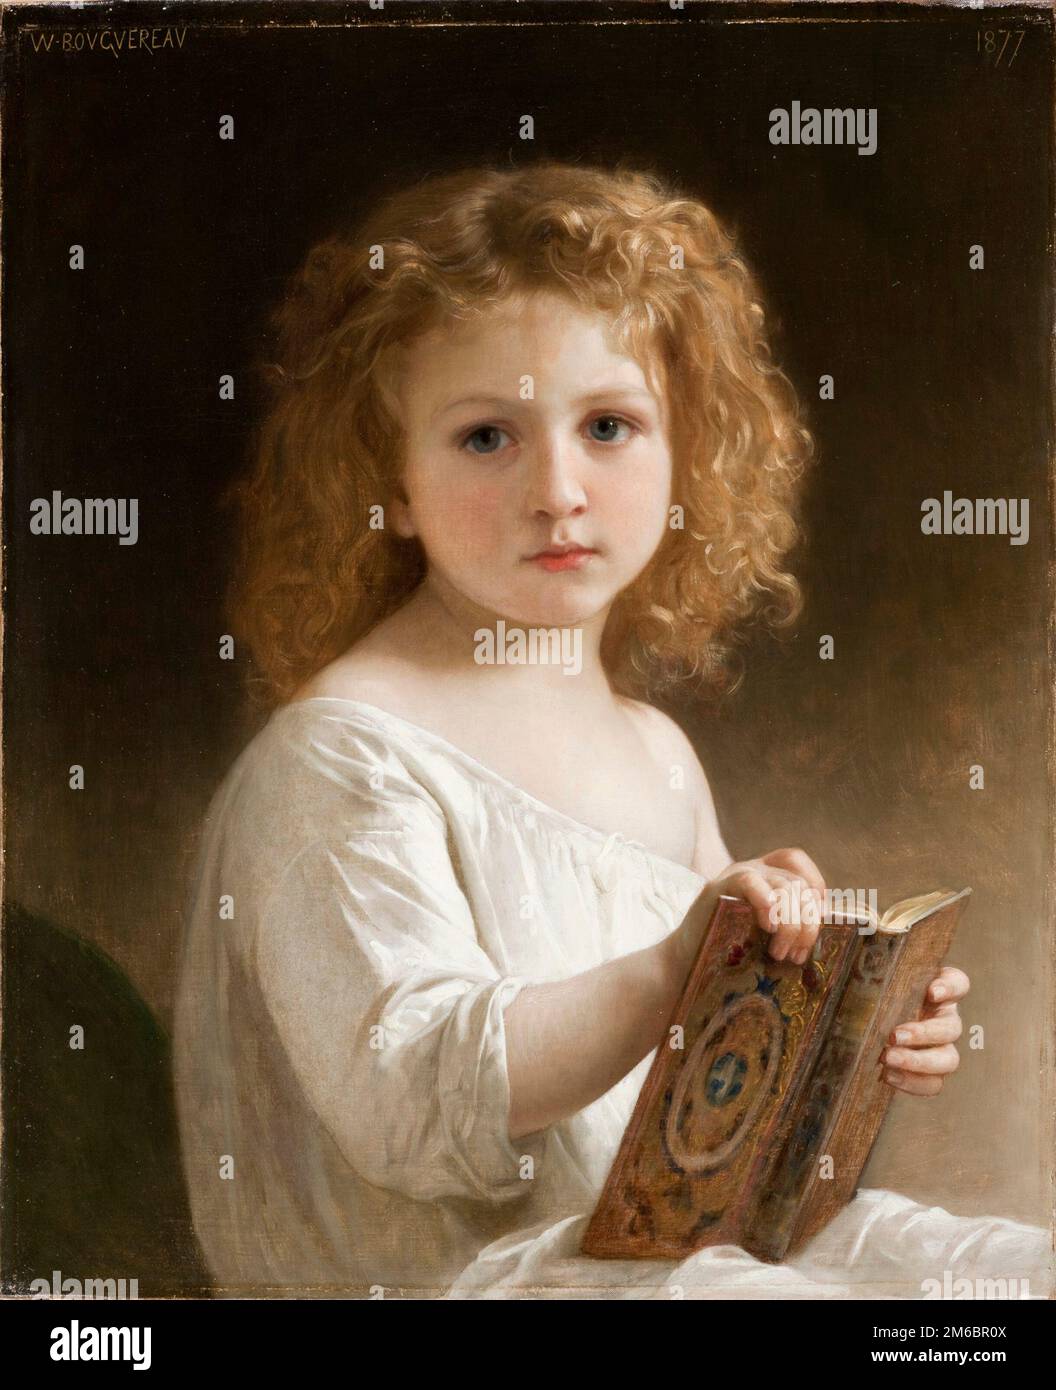 Le Livre de Contes (The Story Book) painted by nineteenth-century French painter William-Adolphe Bouguereau in 1877 Stock Photo